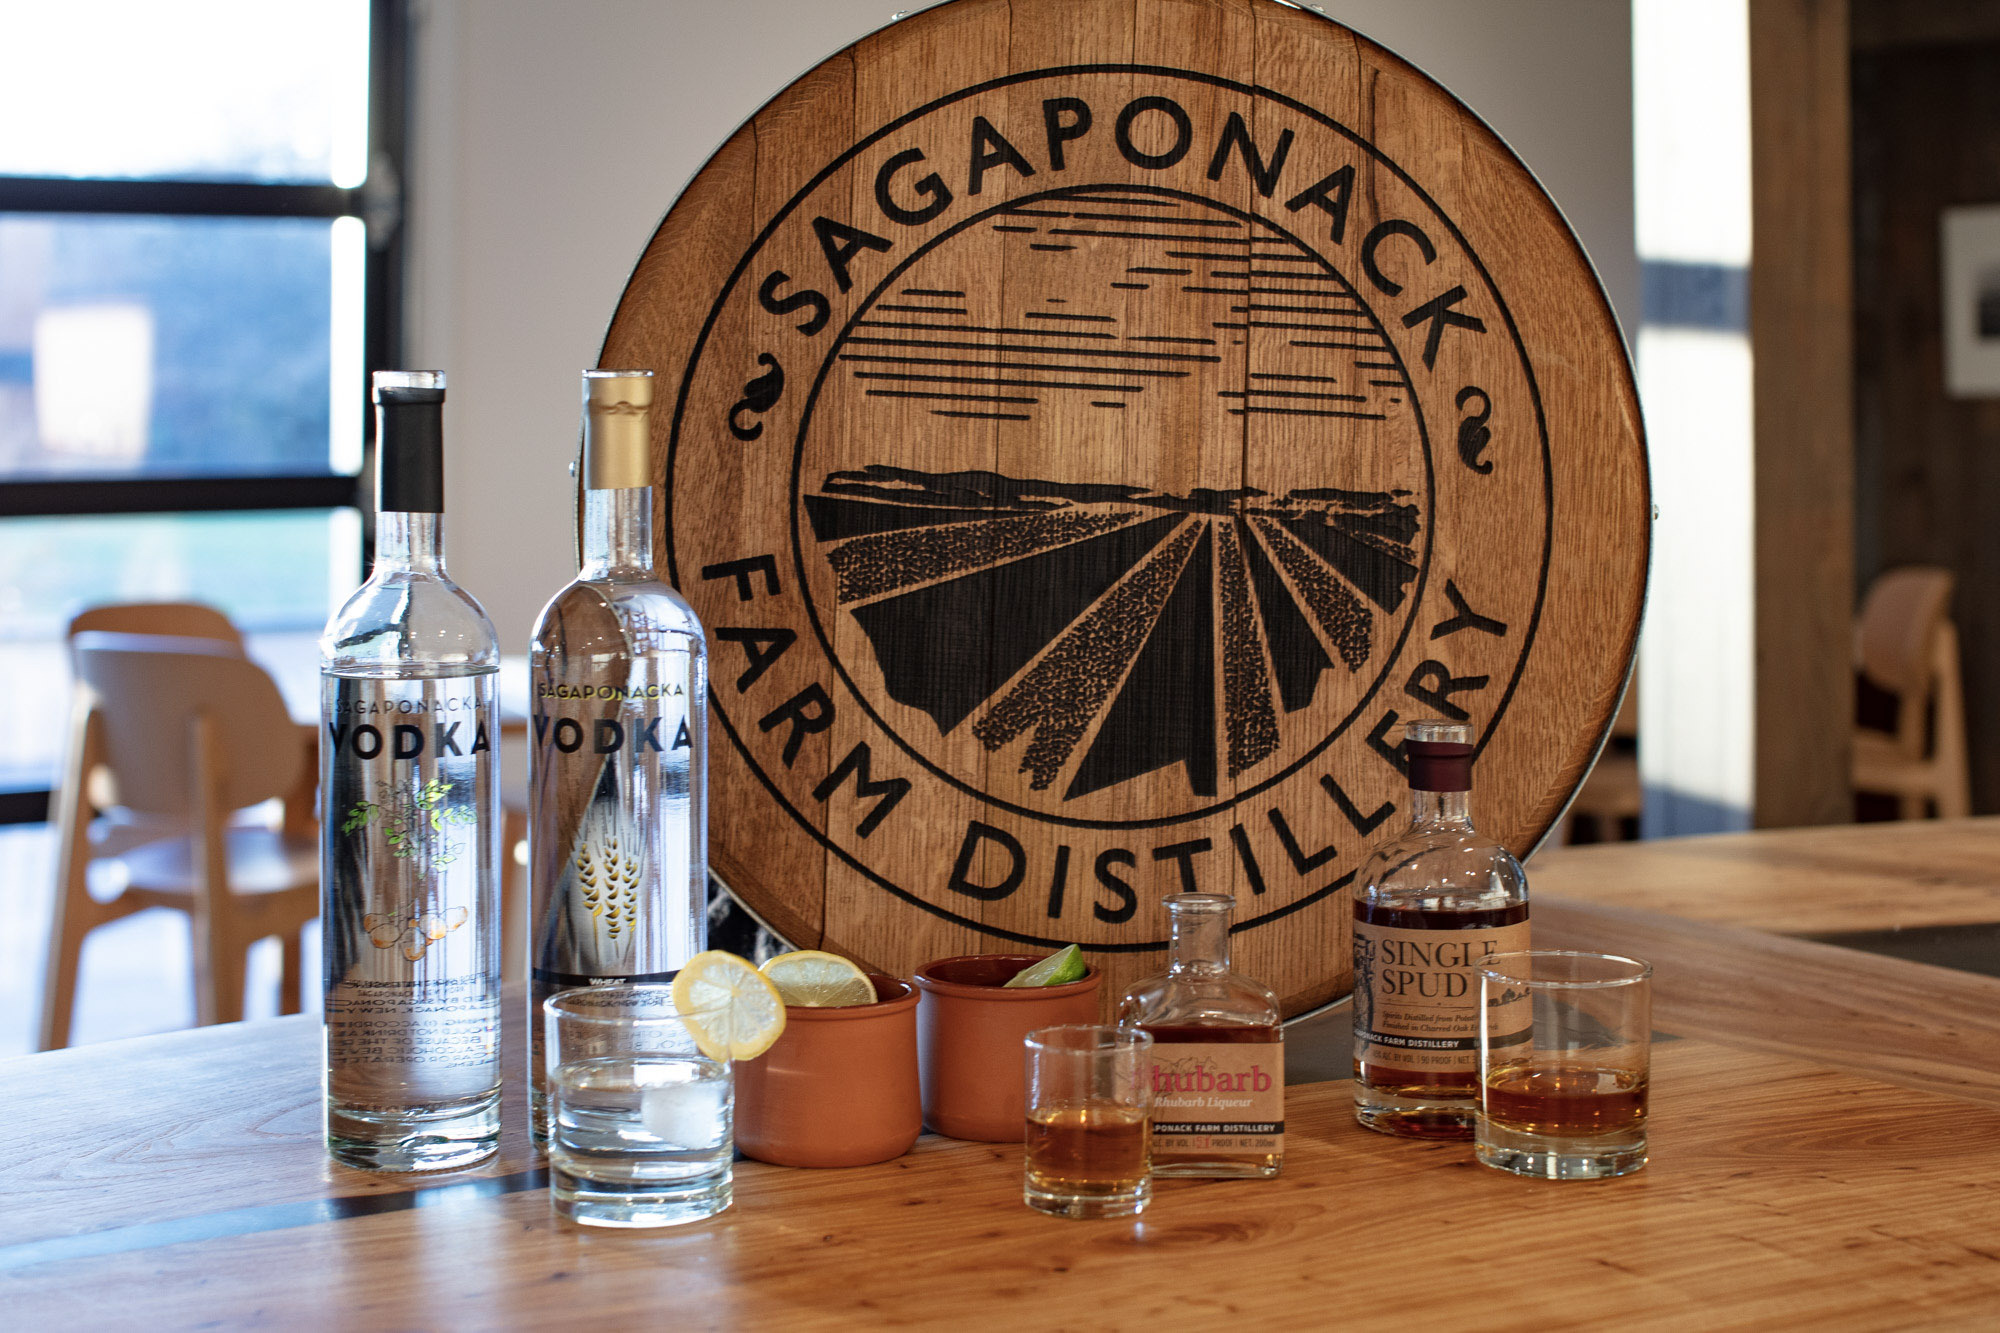 Sagaponack Farm Distillery is the location for the August 21 